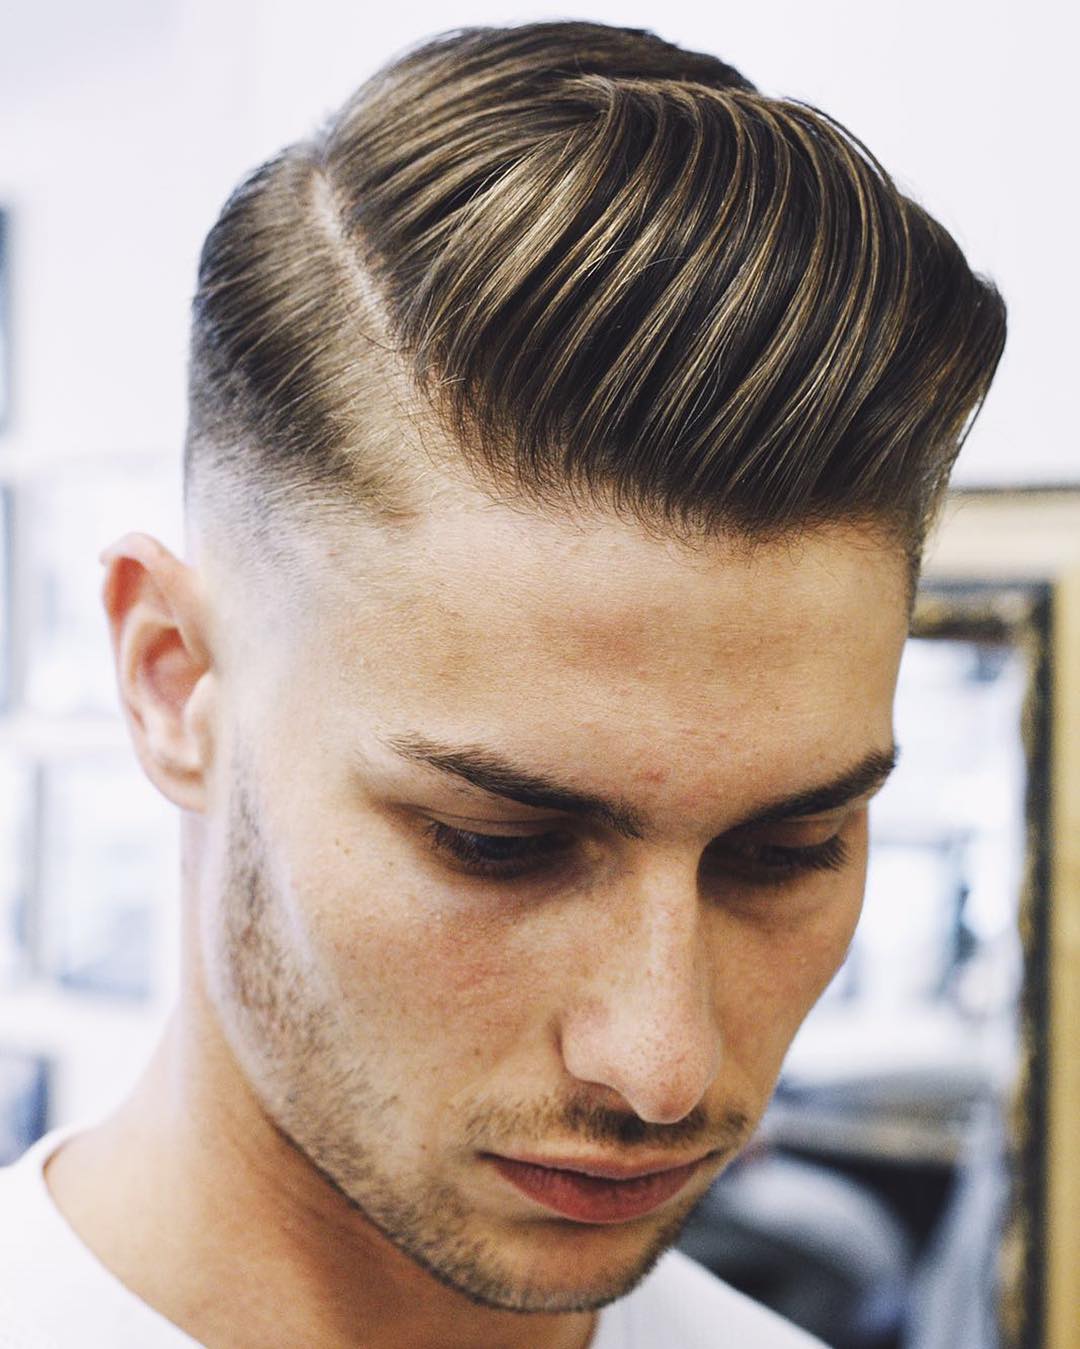 Sleek Side Parted Hairstyle for Men 1